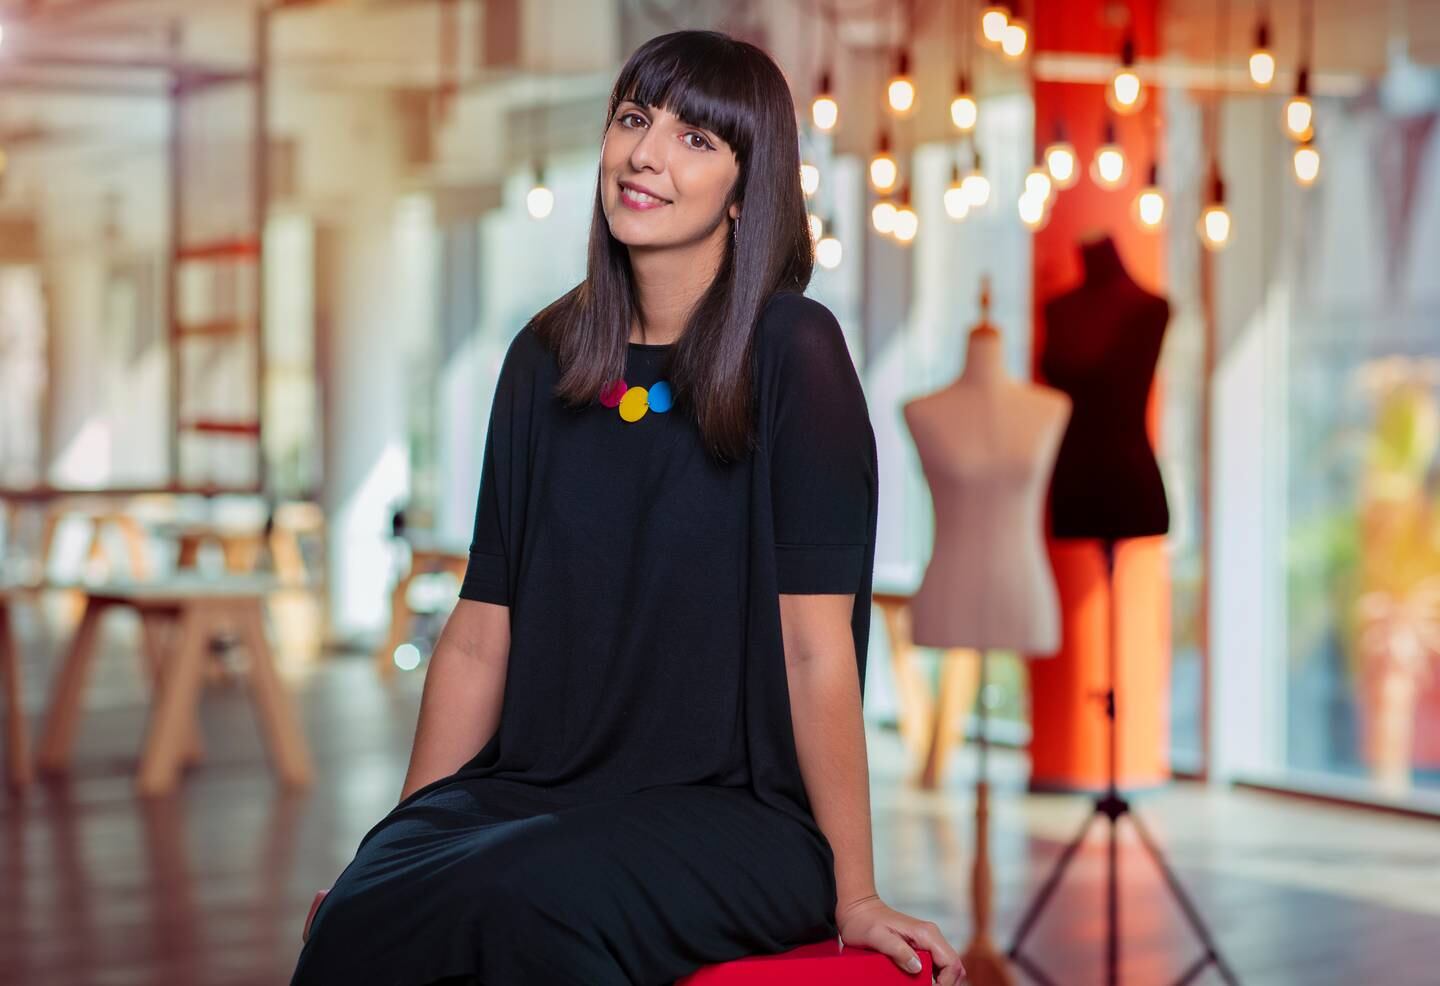 Noorin Khamisani teaches students at the Dubai Institute of Design and Innovation to find inspiration in old clothes.